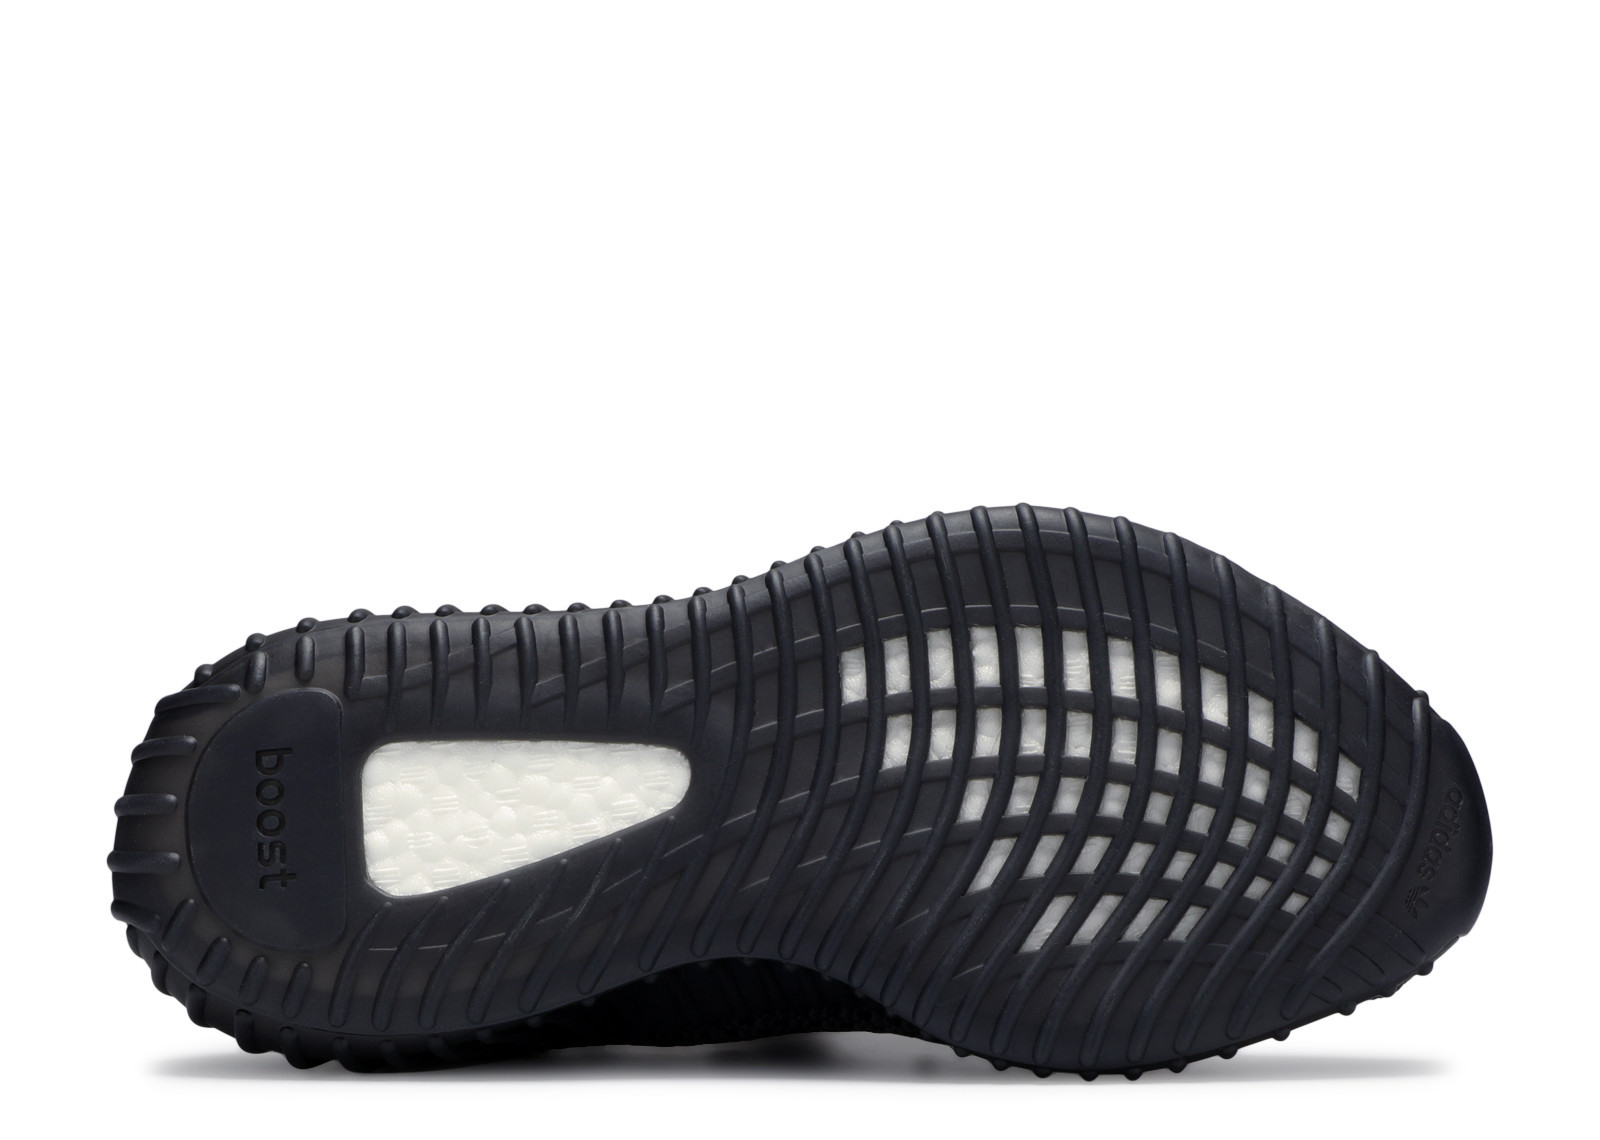 yeezy non reflective black release date